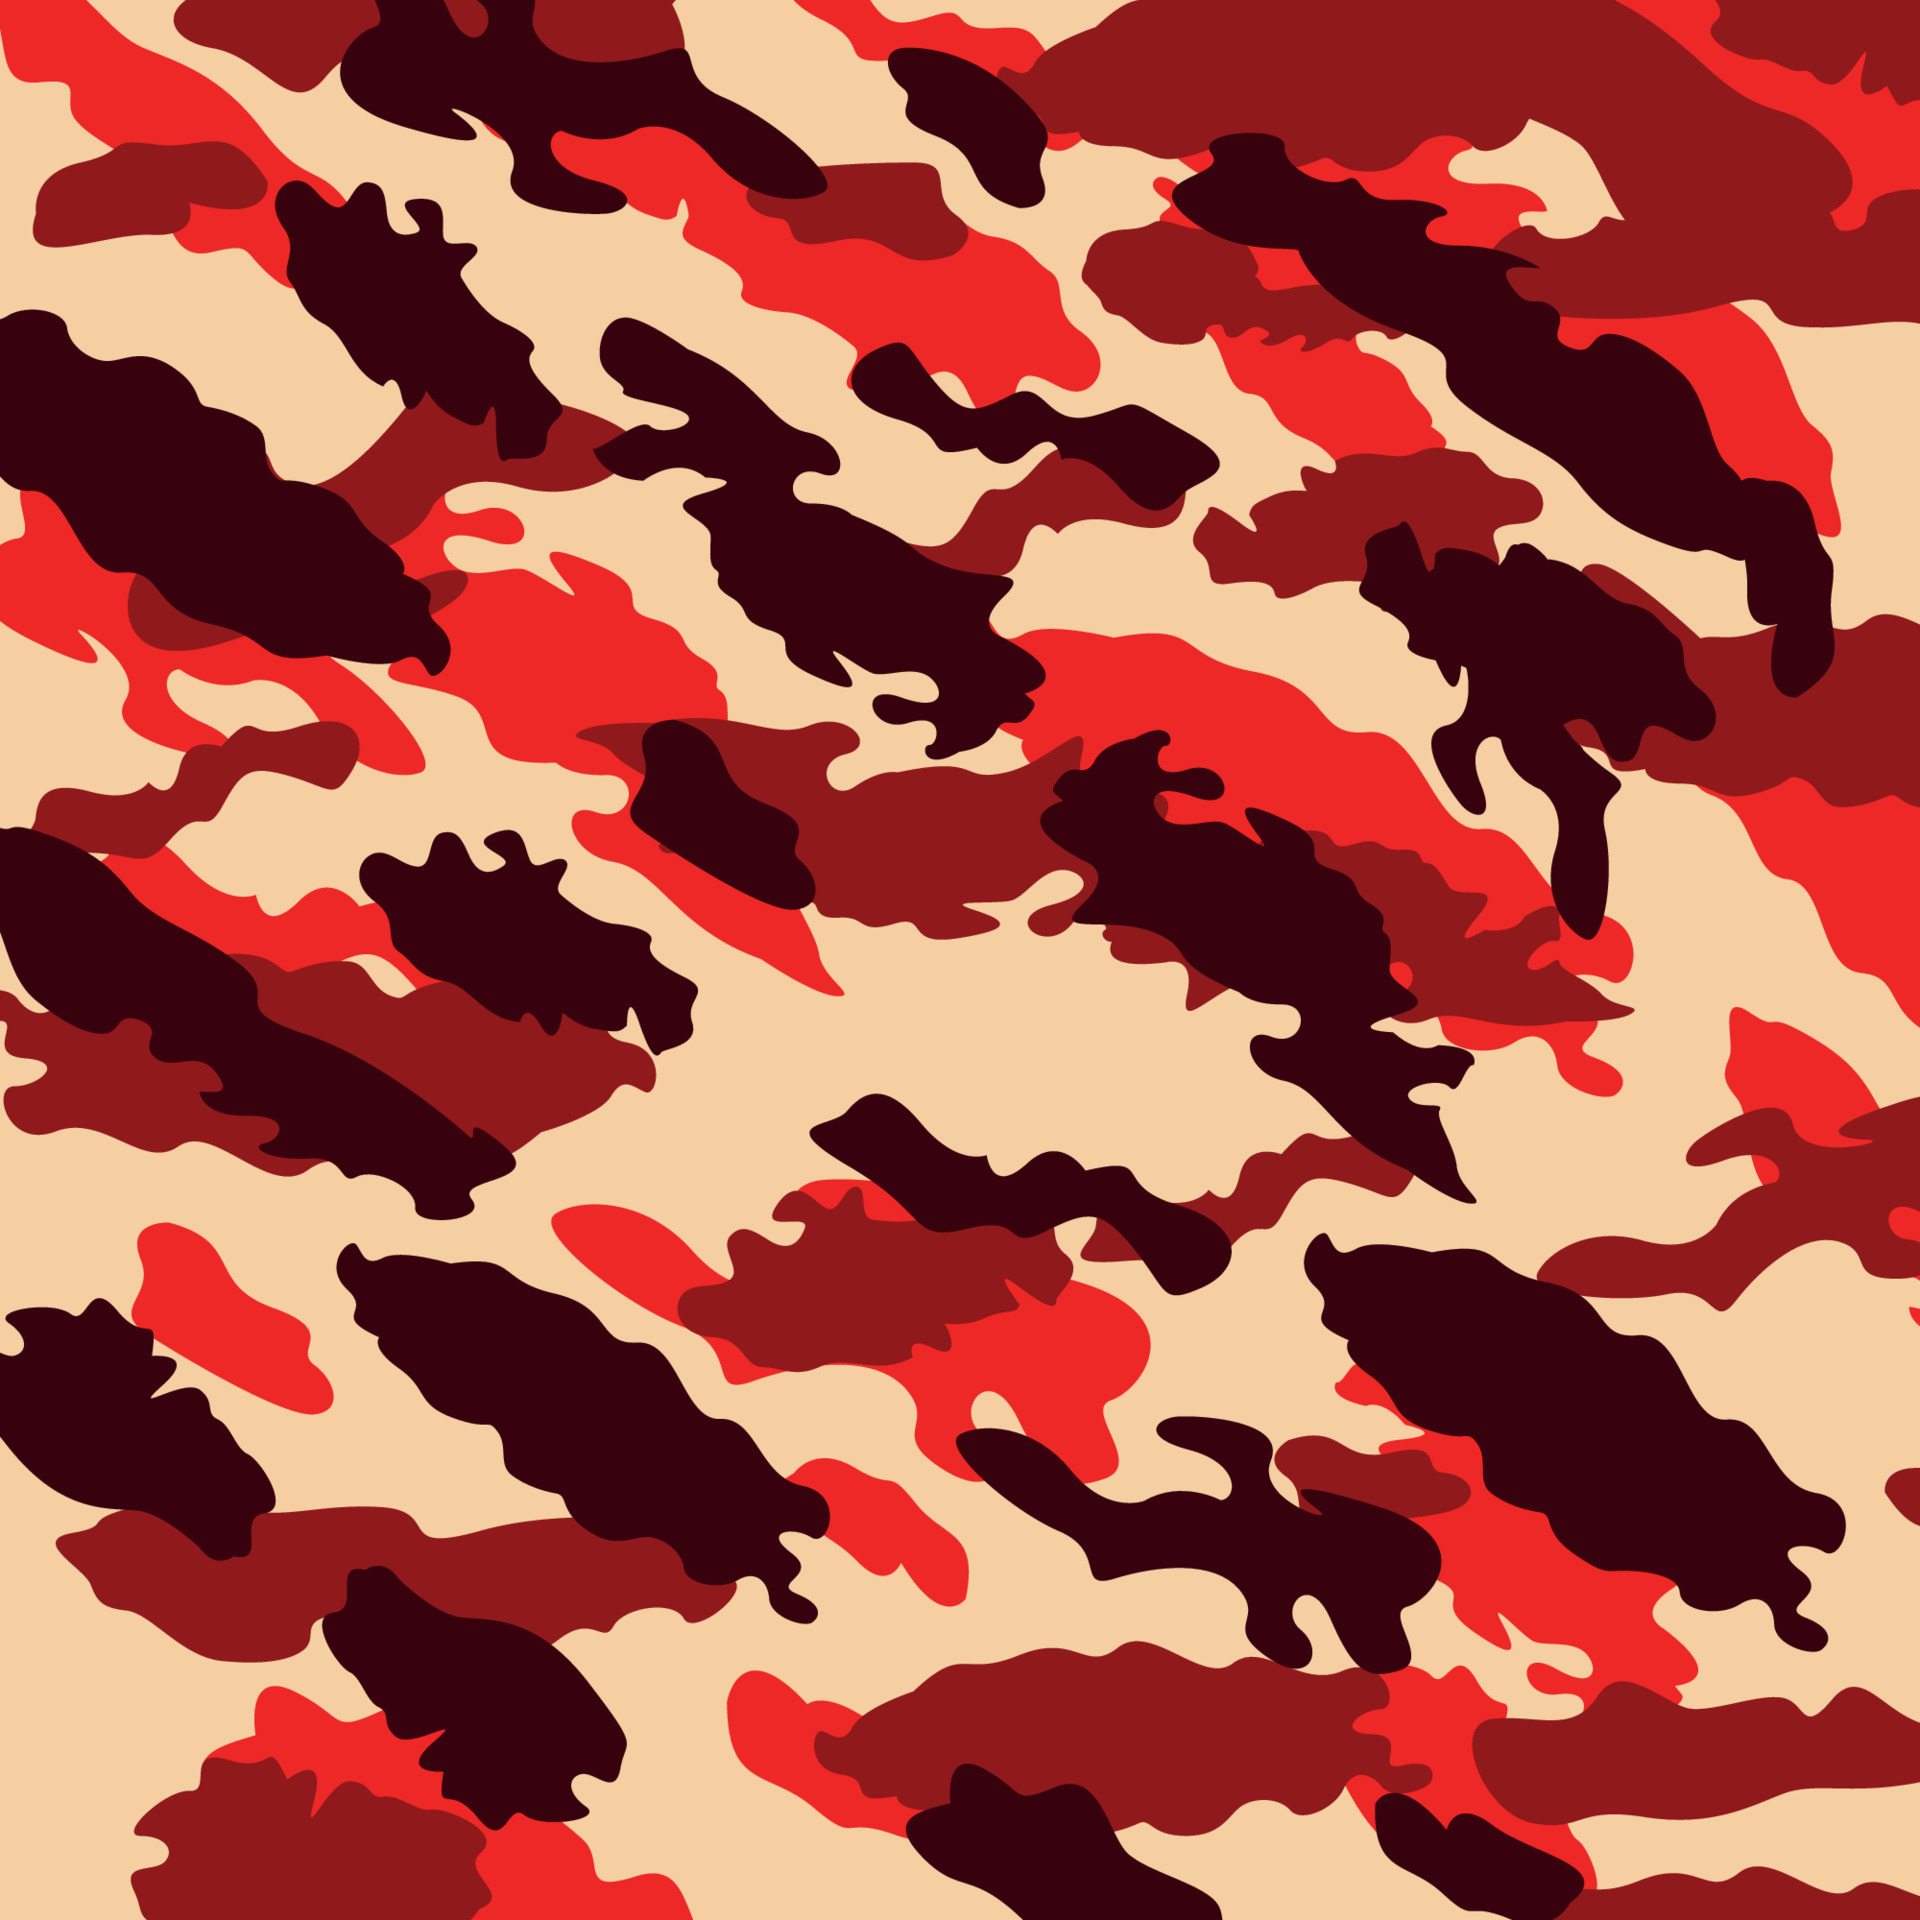 Camouflage seamless pattern. Abstract background of red and gray spots.  Military camo. Print. Vector Stock Vector